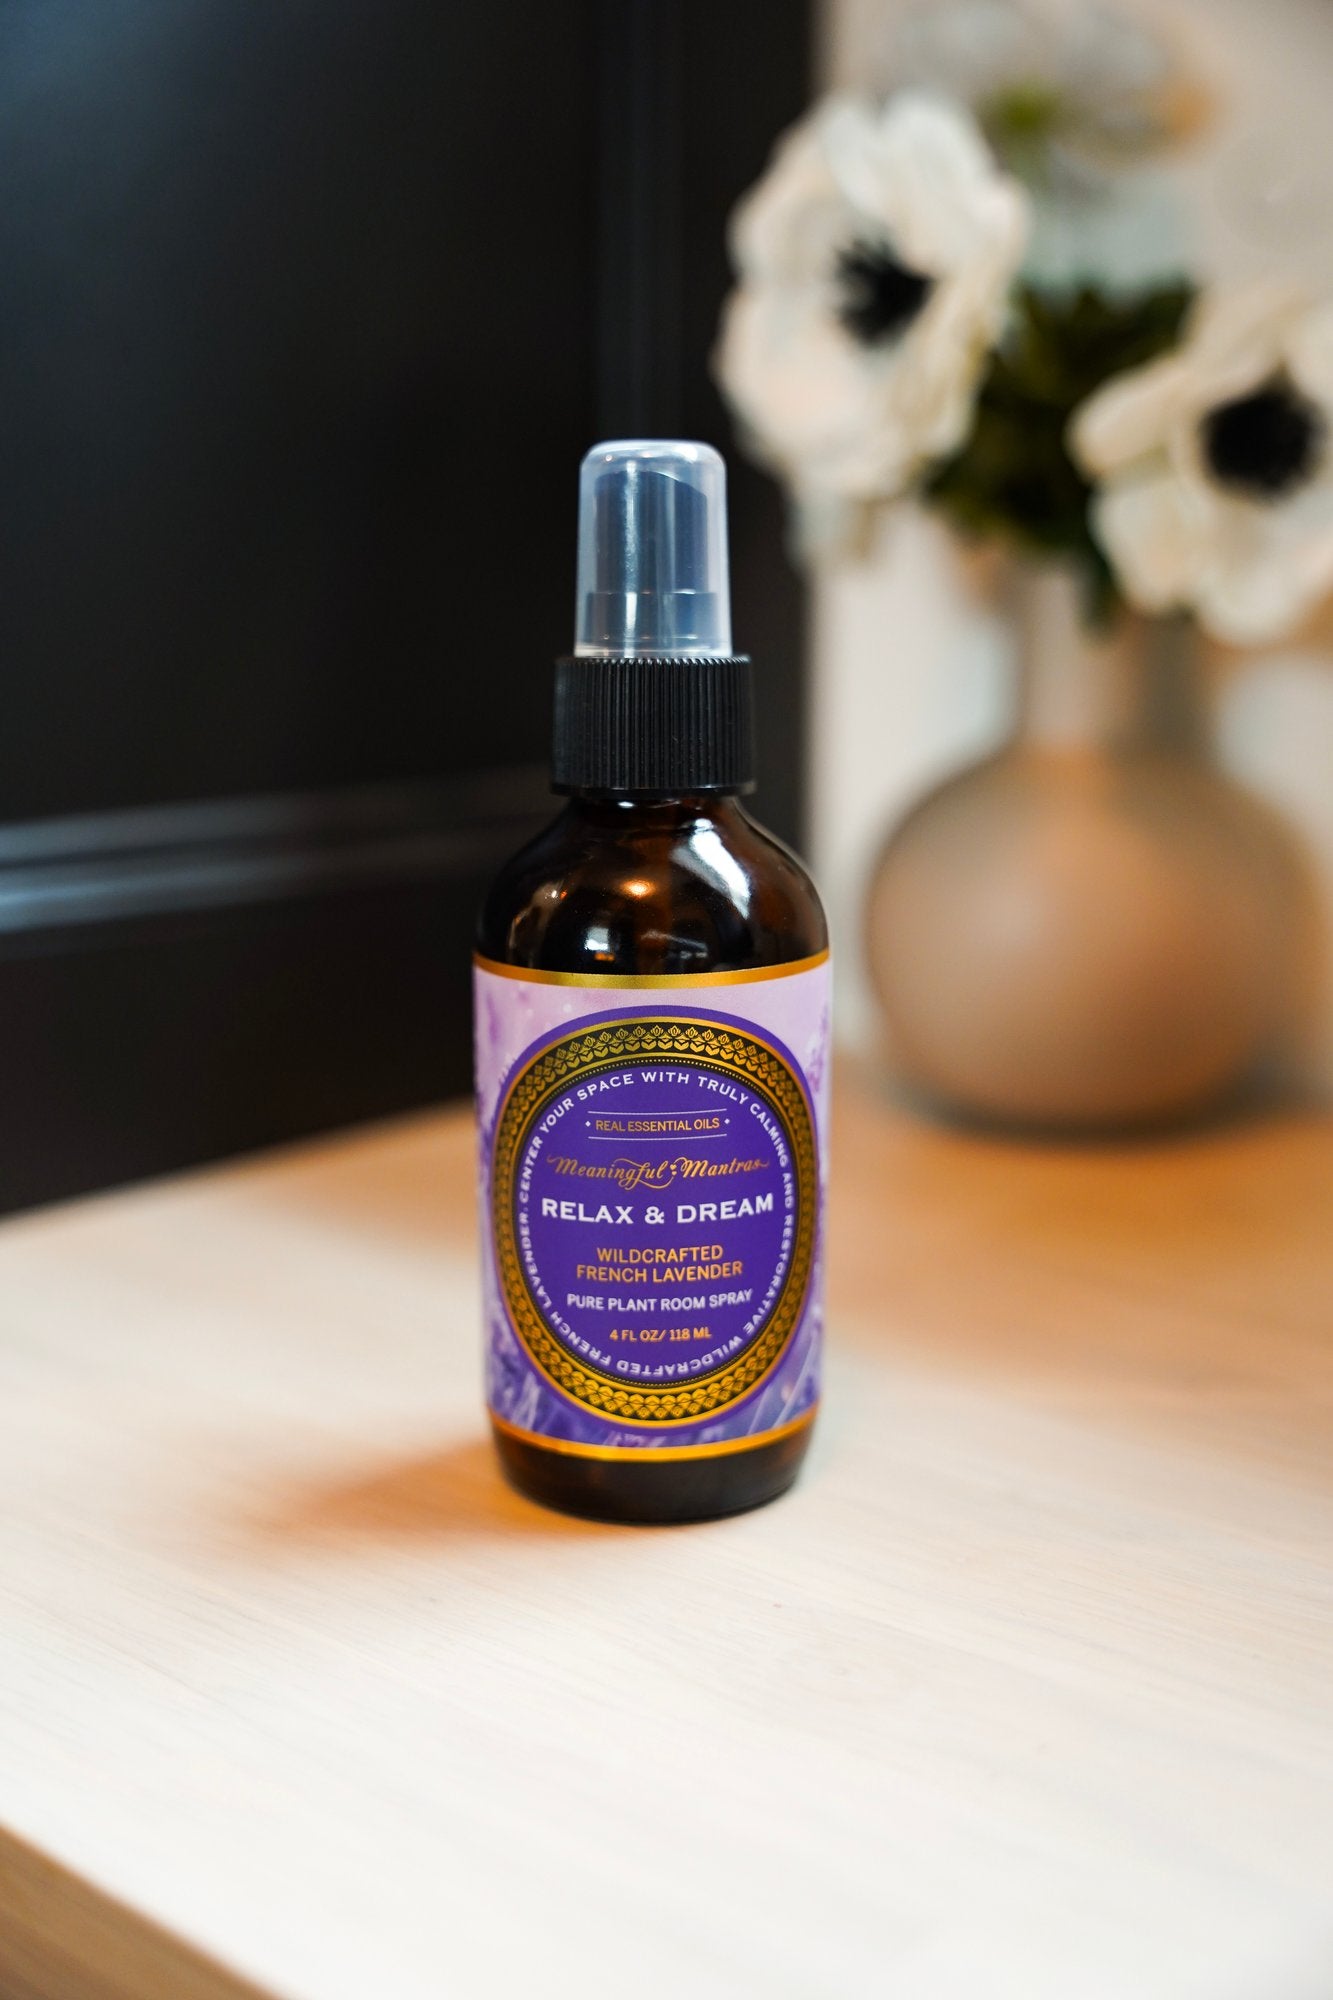 Relax & Dream Wildcrafted French Lavender Pure Plant Room Spray